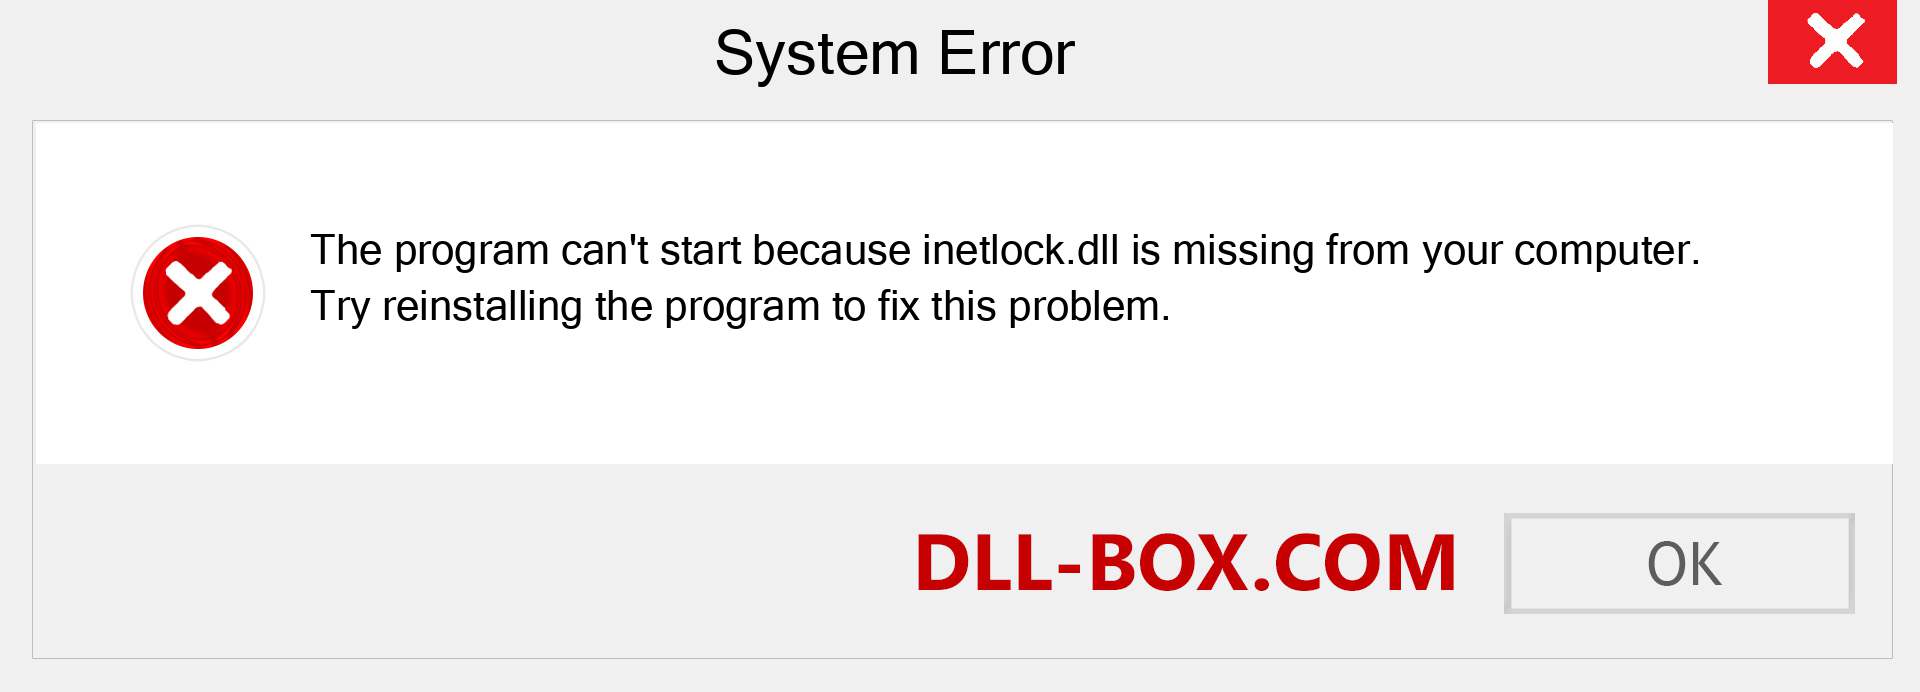  inetlock.dll file is missing?. Download for Windows 7, 8, 10 - Fix  inetlock dll Missing Error on Windows, photos, images